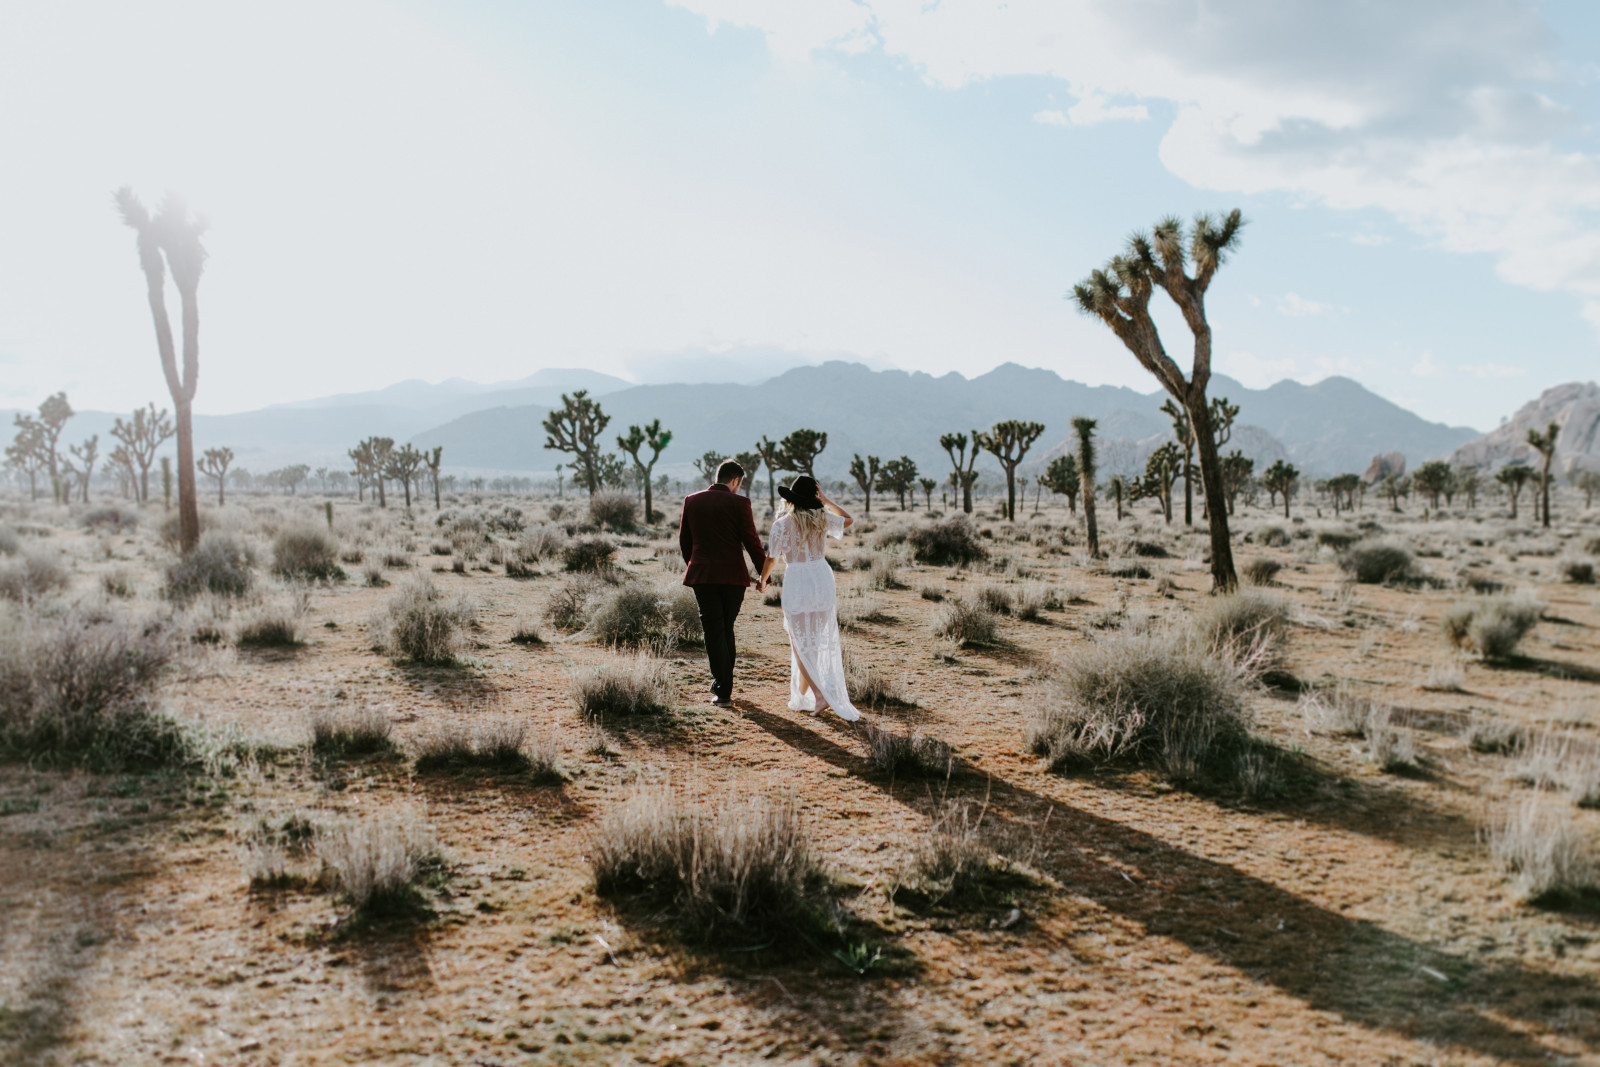 Alyssa and Jeremy kiss with a view Joshua Tree National Park, CA Elopement wedding photography at Joshua Tree National Park by Sienna Plus Josh.